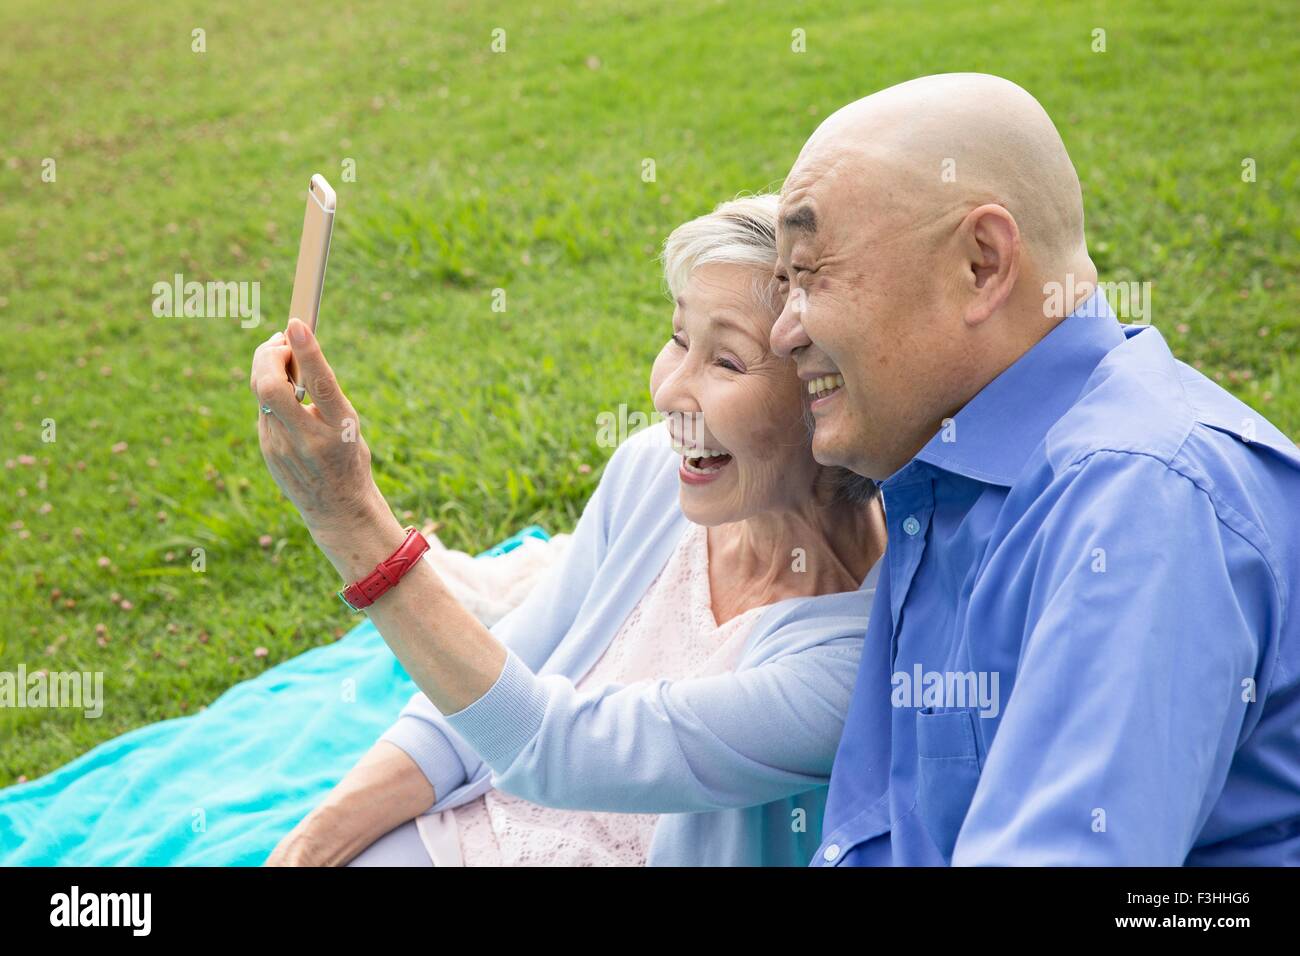 Senior couple sitting in park, taking self portrait using smartphone Banque D'Images